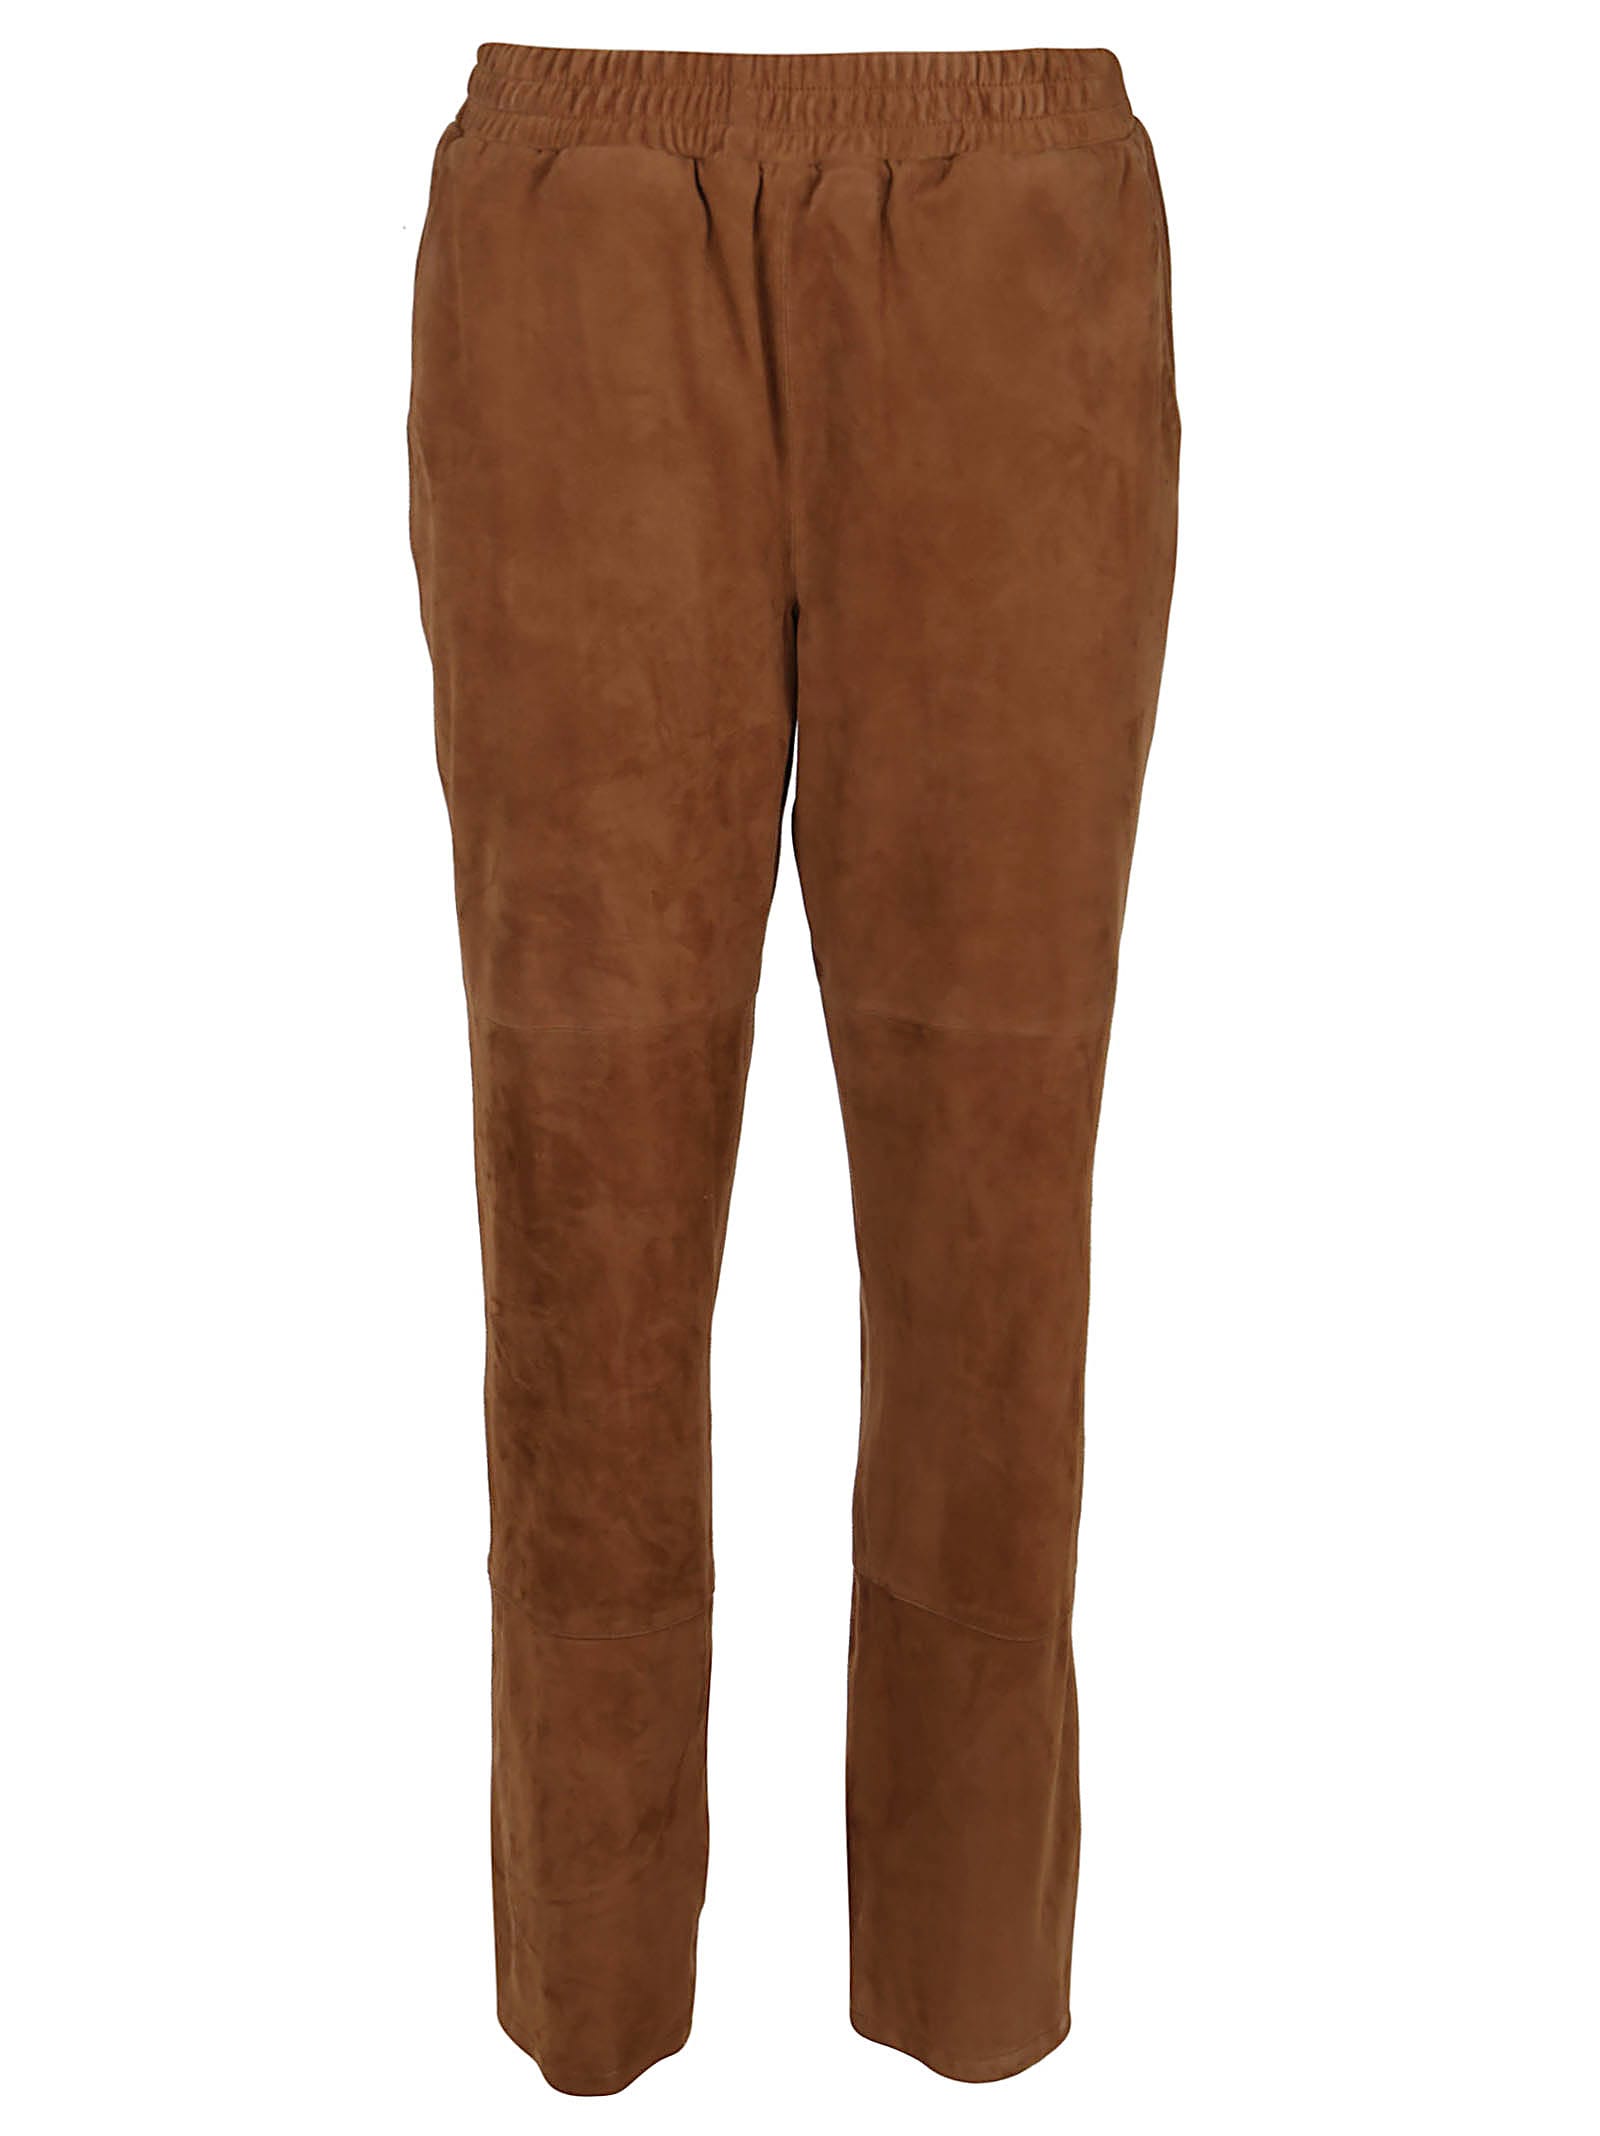 Arma Abigail Goat Suede Pants In Cigar